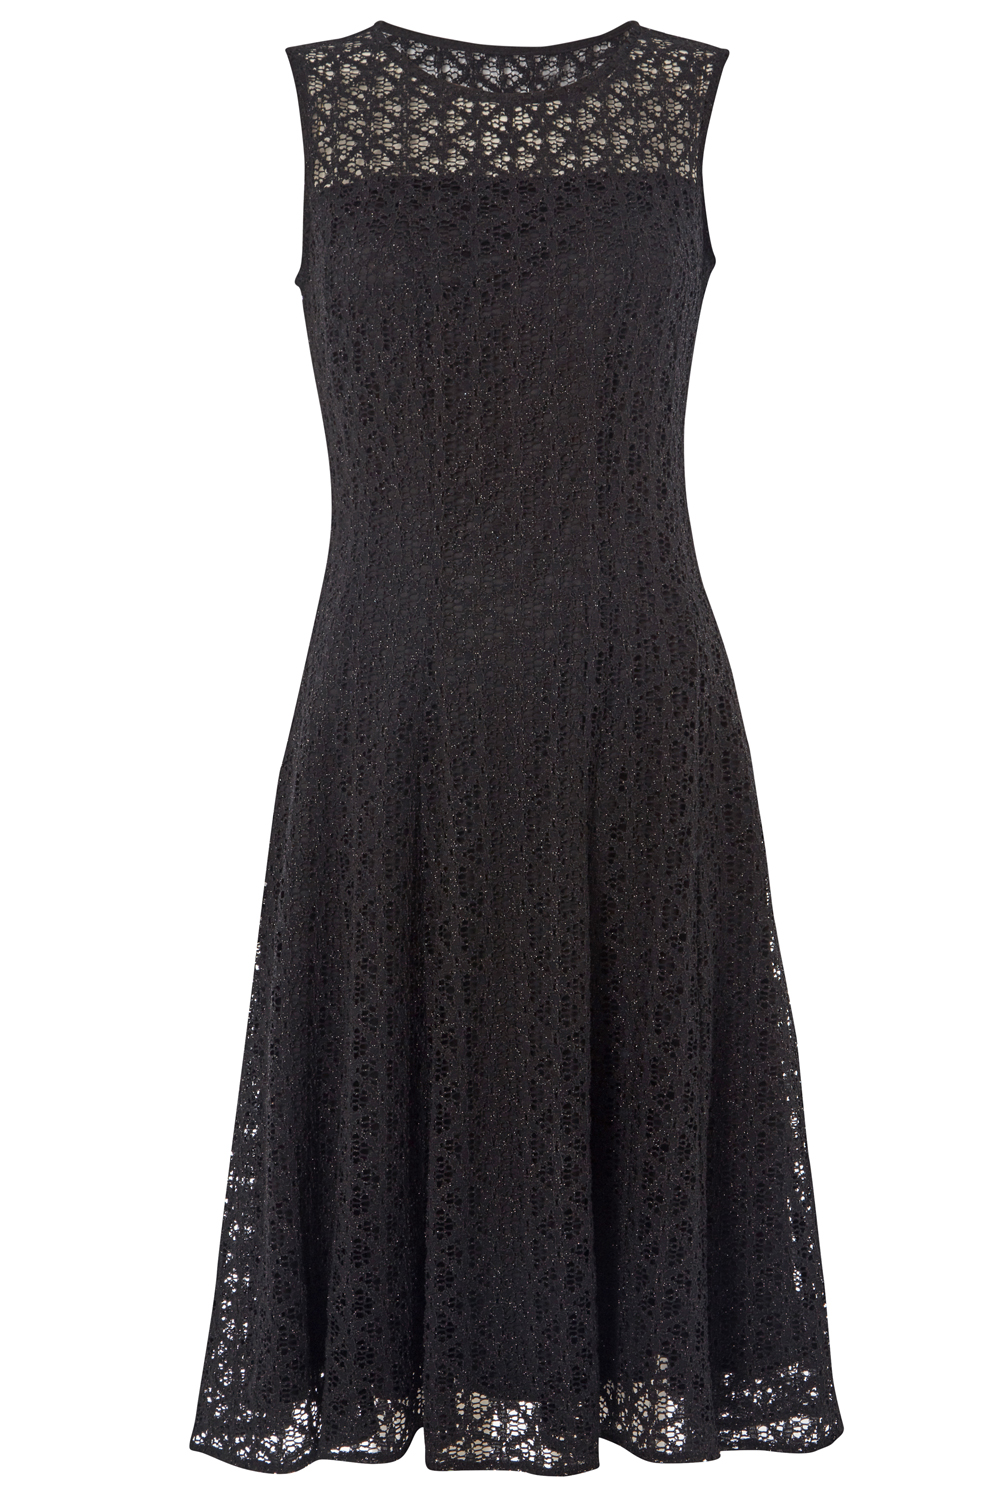 Lace Fit and Flare Dress in Black - Roman Originals UK